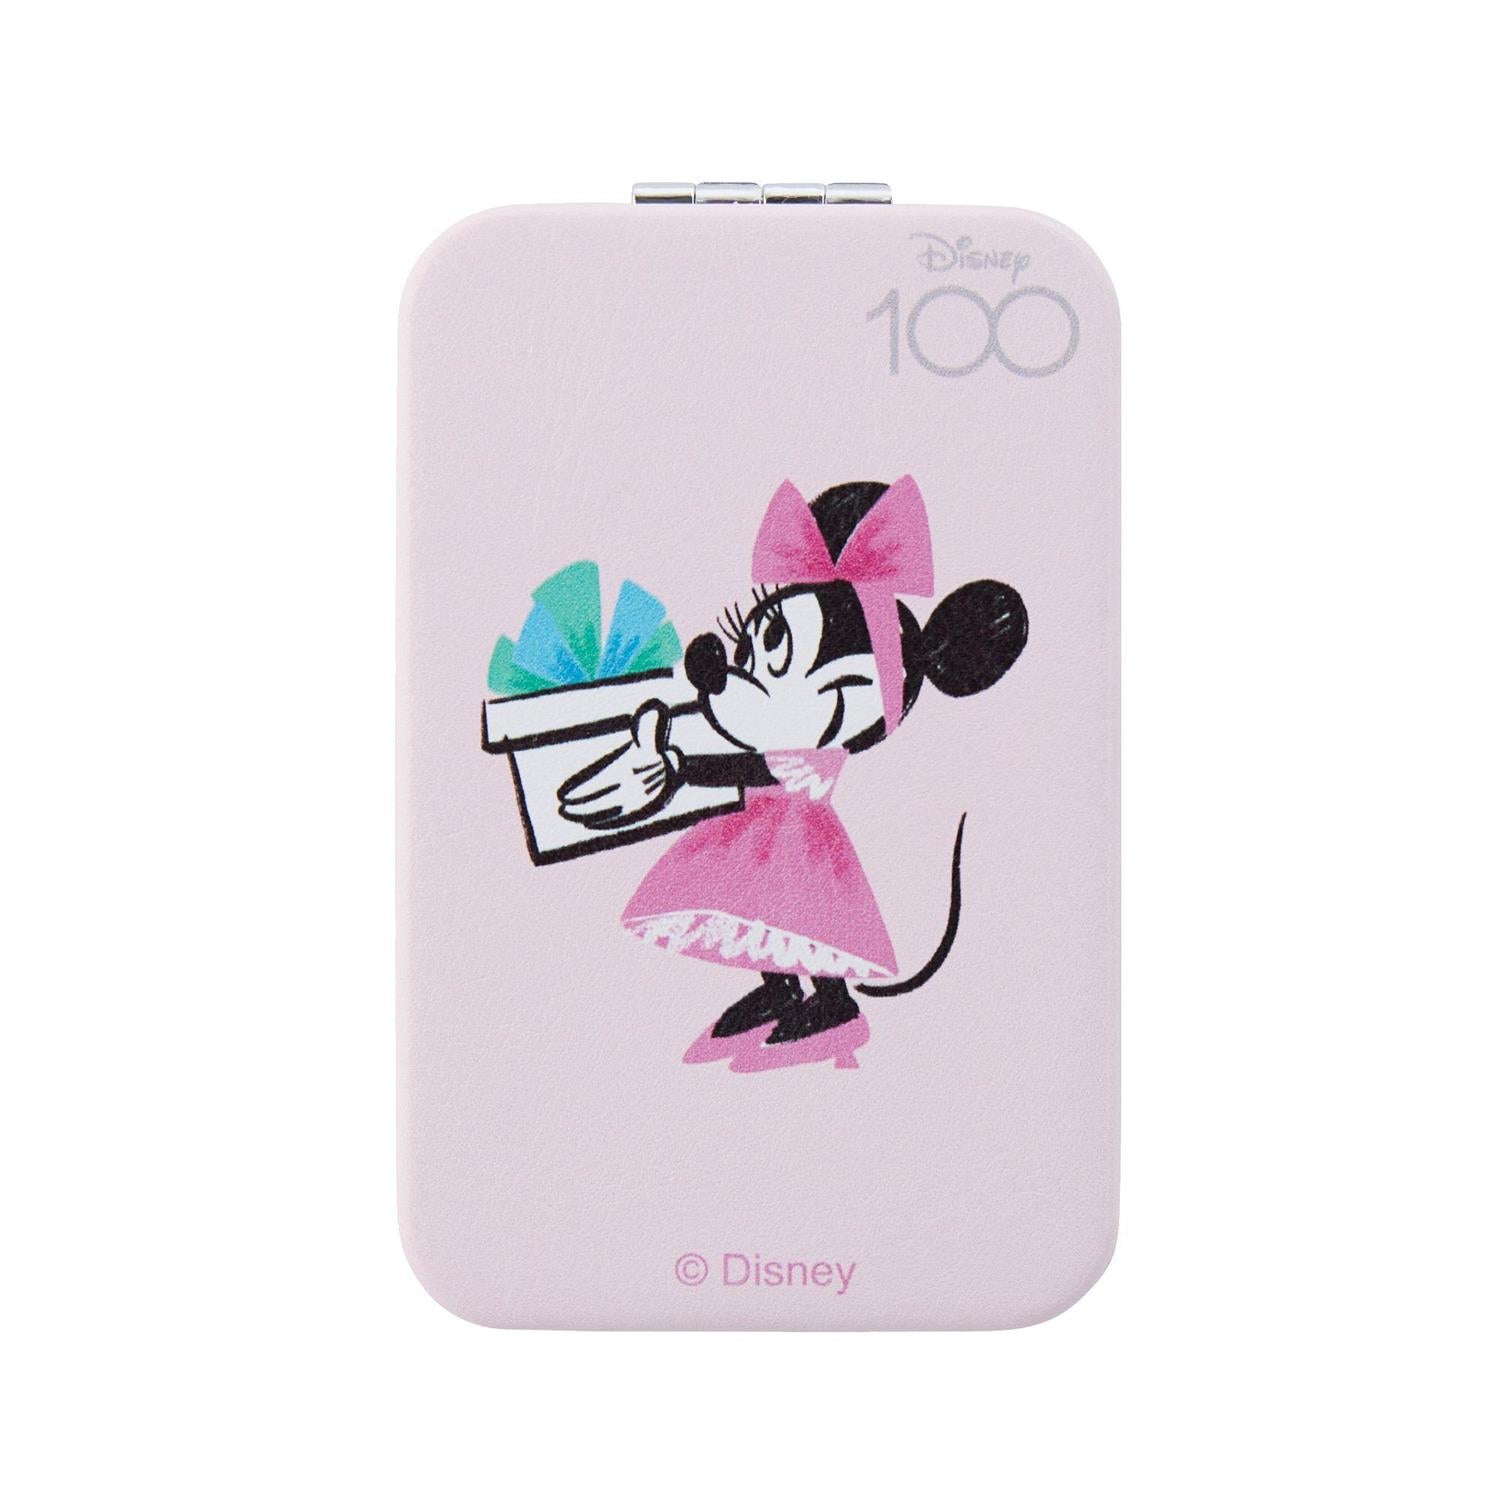 Disney Minnie Mouse Compact Mirror